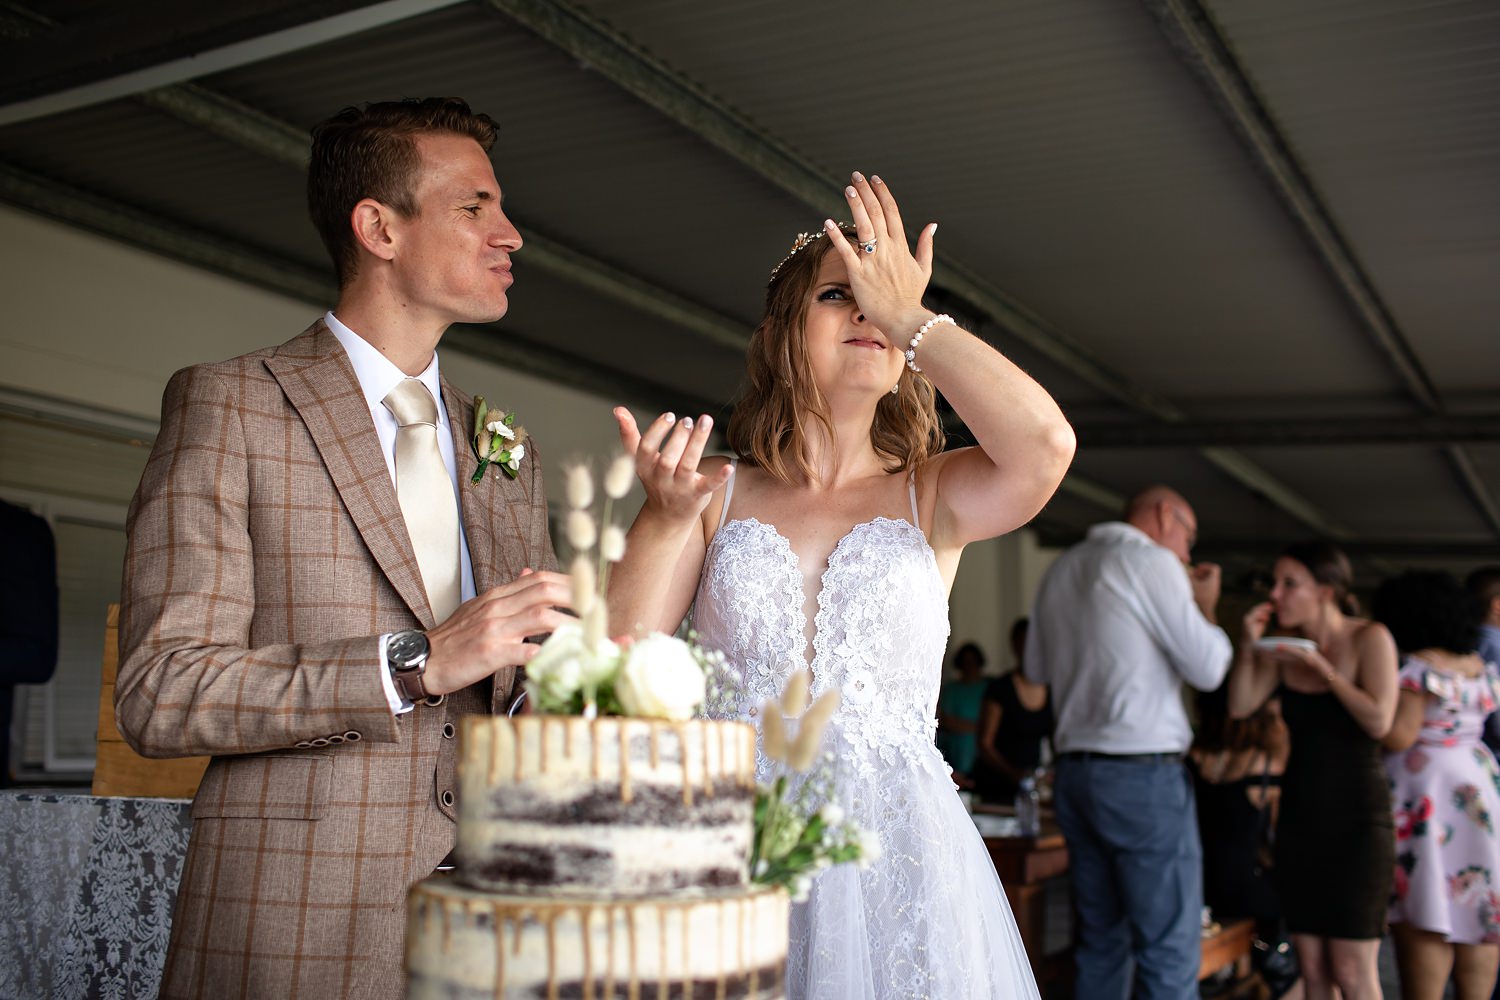 Bride wipes her nose in an upward motion after groom smears cake on her face during canapes after the wedding ceremony at Andante wedding venue